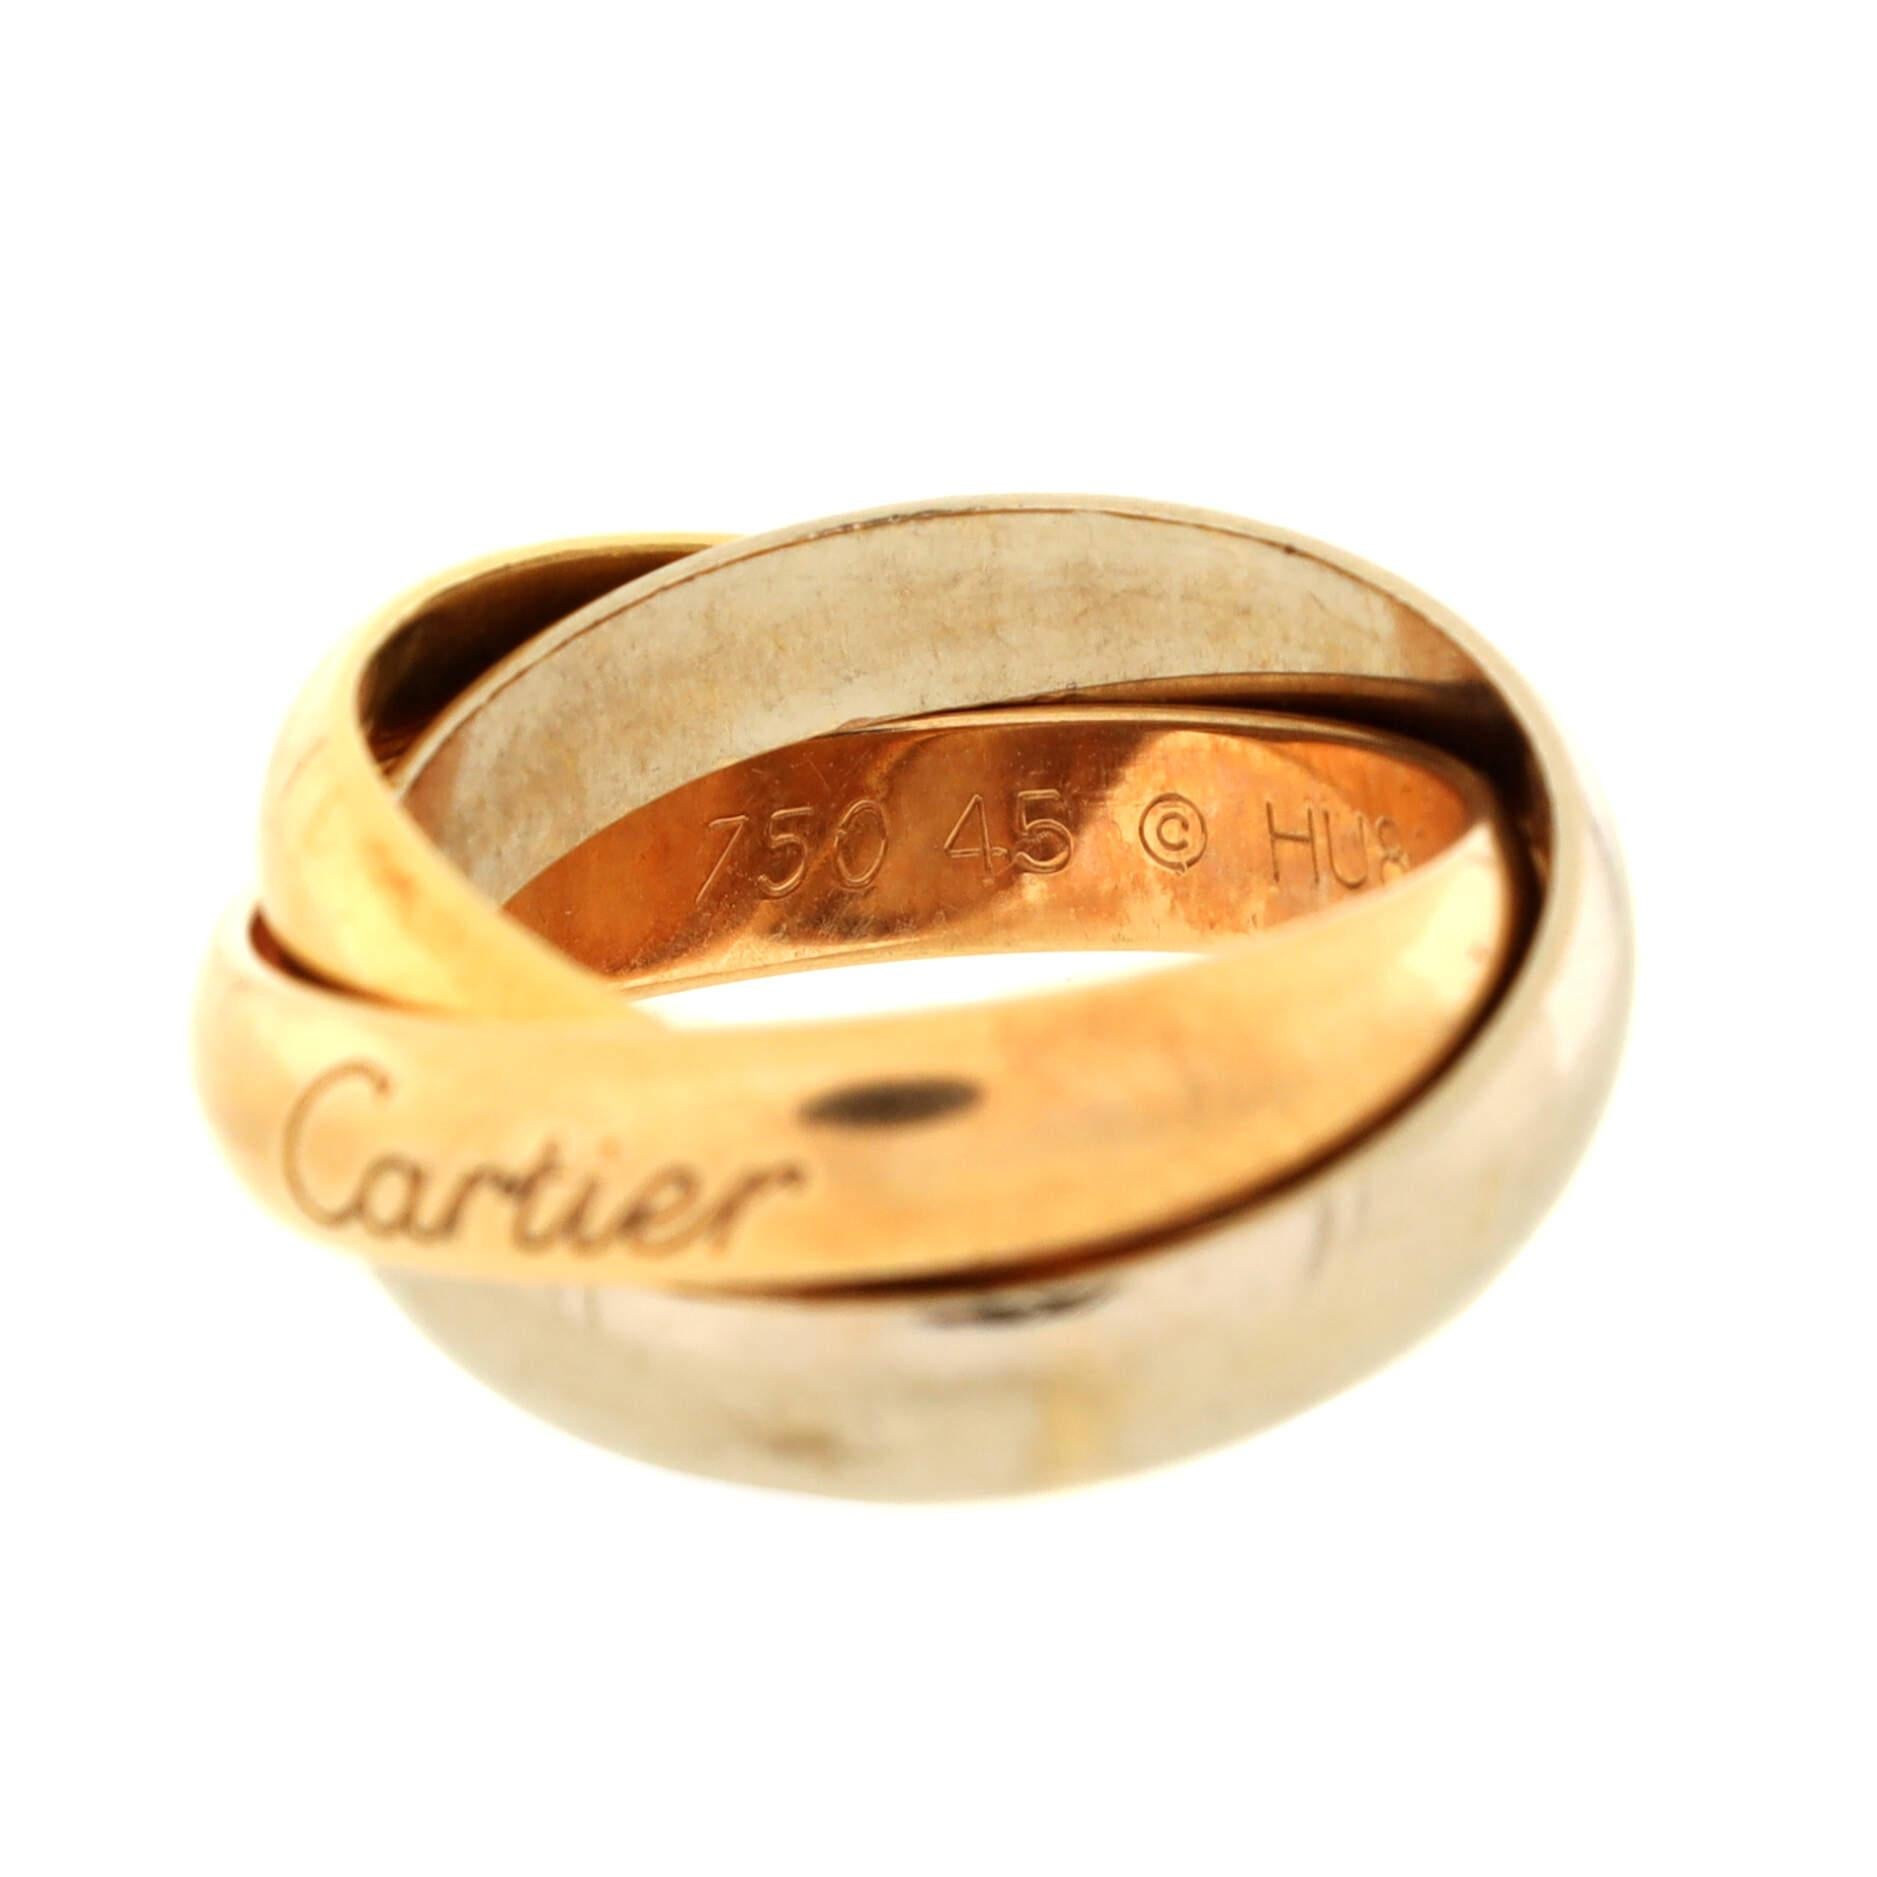 Condition: Good. Moderate wear throughout.
Accessories: No Accessories
Measurements: Size: 3.25 - 45, Width: 3.45 mm
Designer: Cartier
Model: Trinity Ring 18K Tricolor Gold Medium
Exterior Color: Tricolor Gold
Item Number: 220908/1